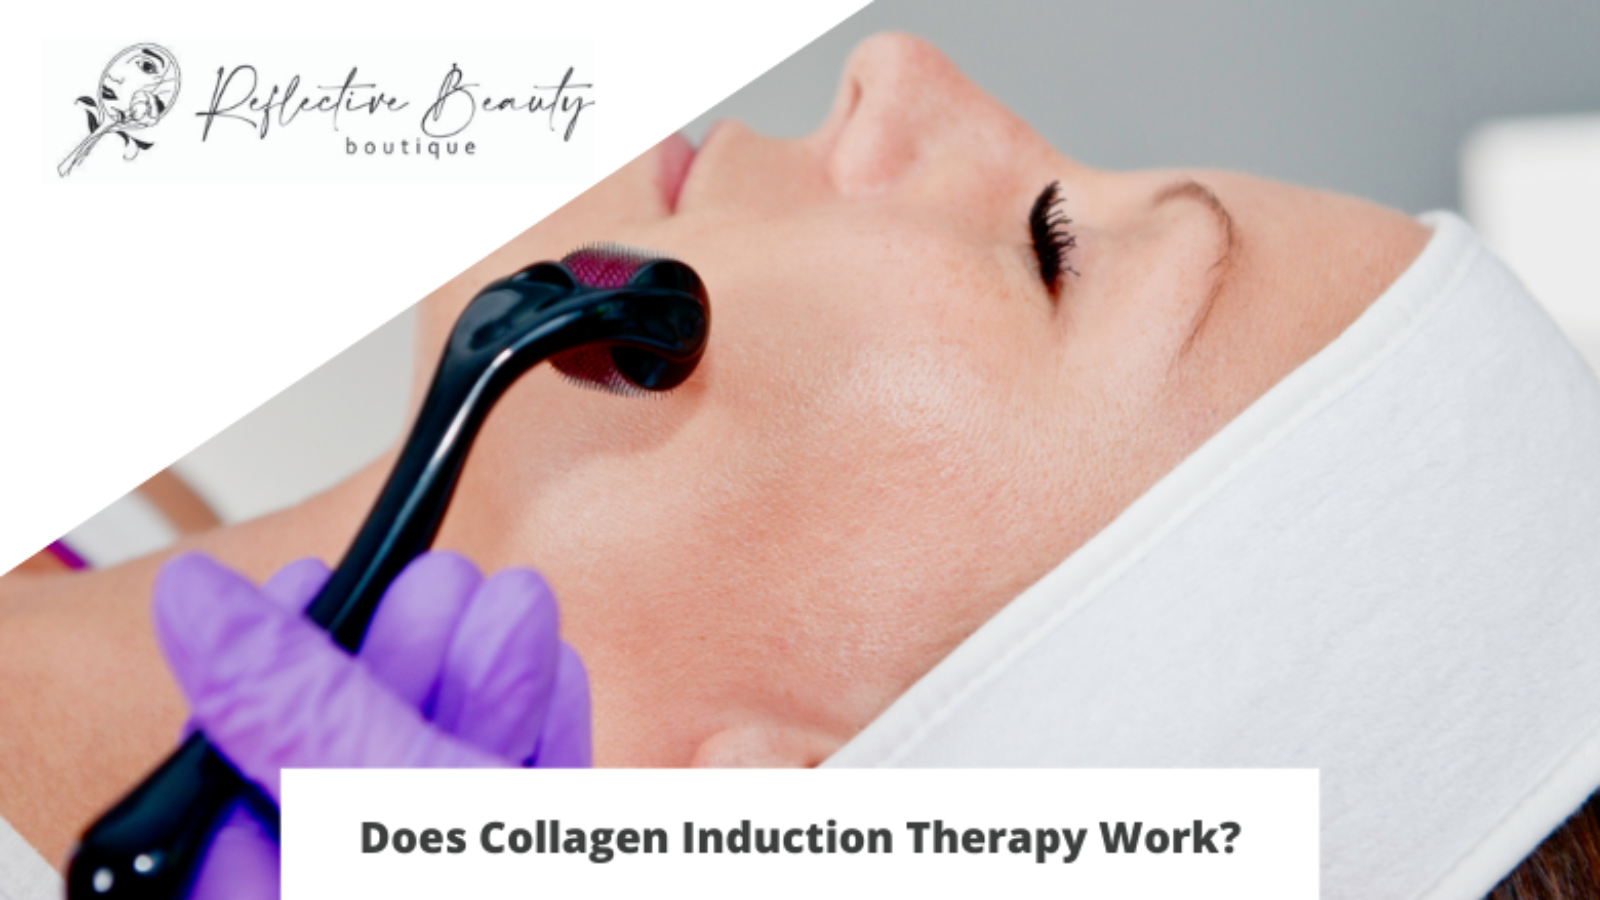 Does Collagen Induction Therapy Work